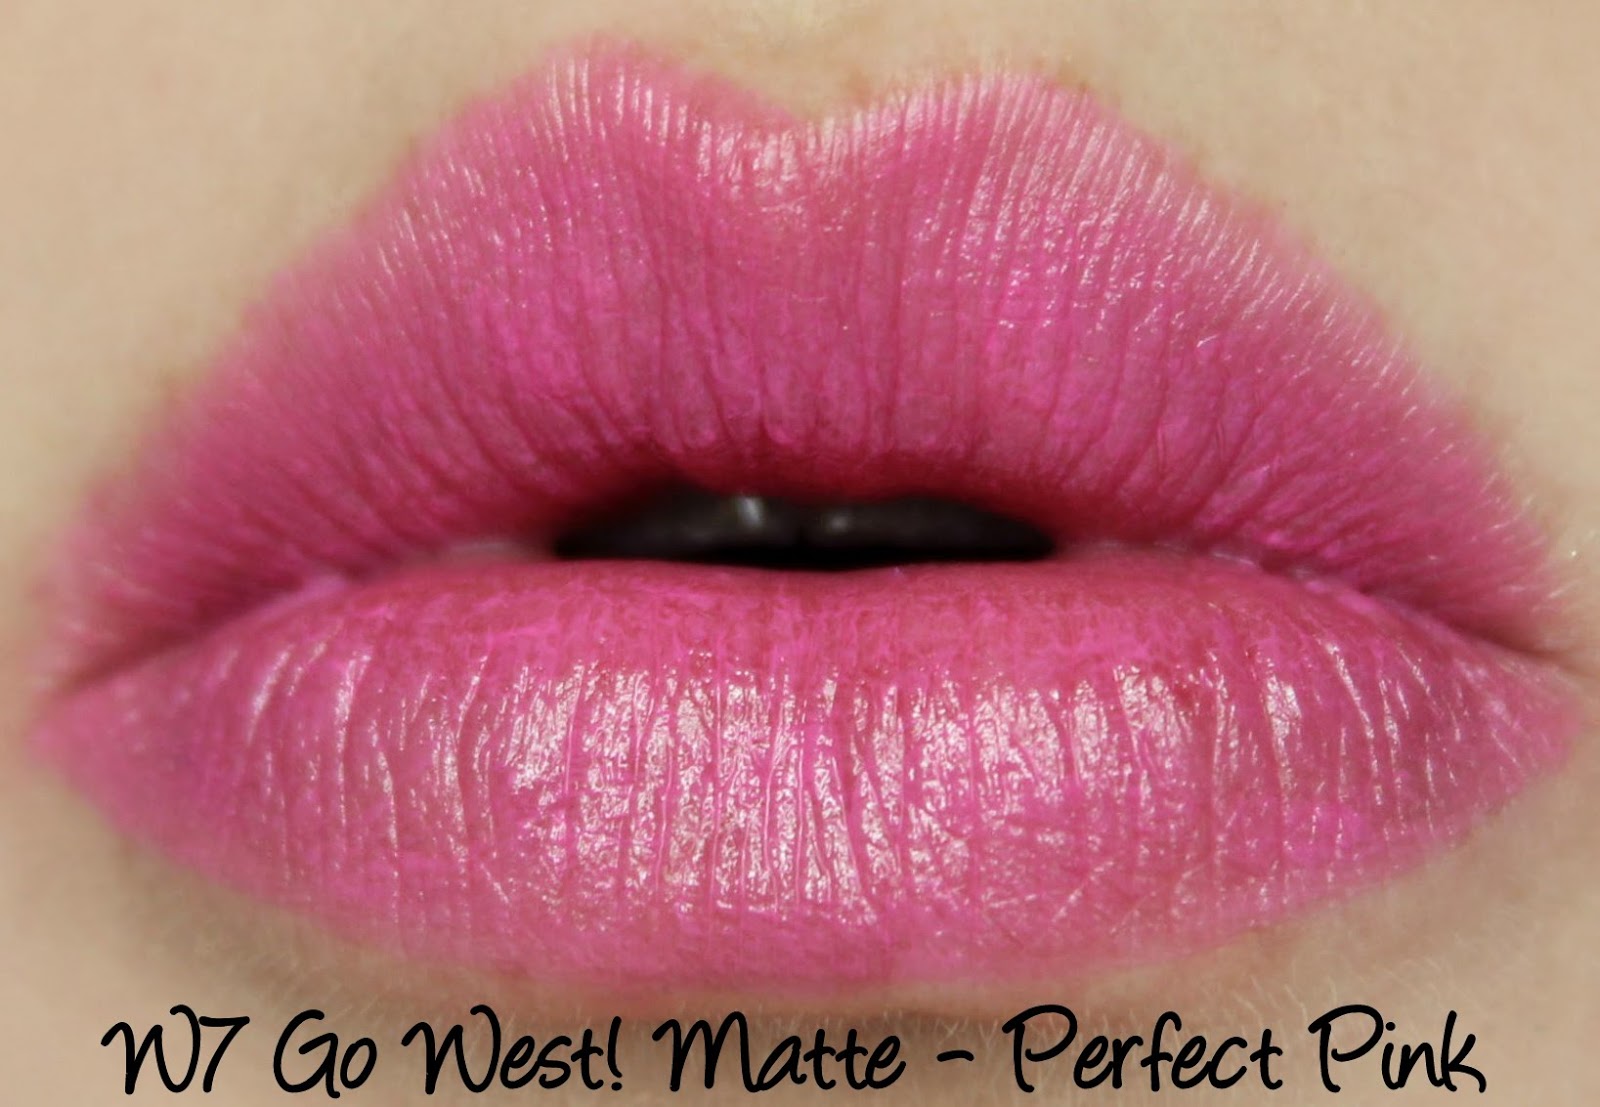 W7 Go West! Matte Lipstick - Perfect Pink Swatches & Review